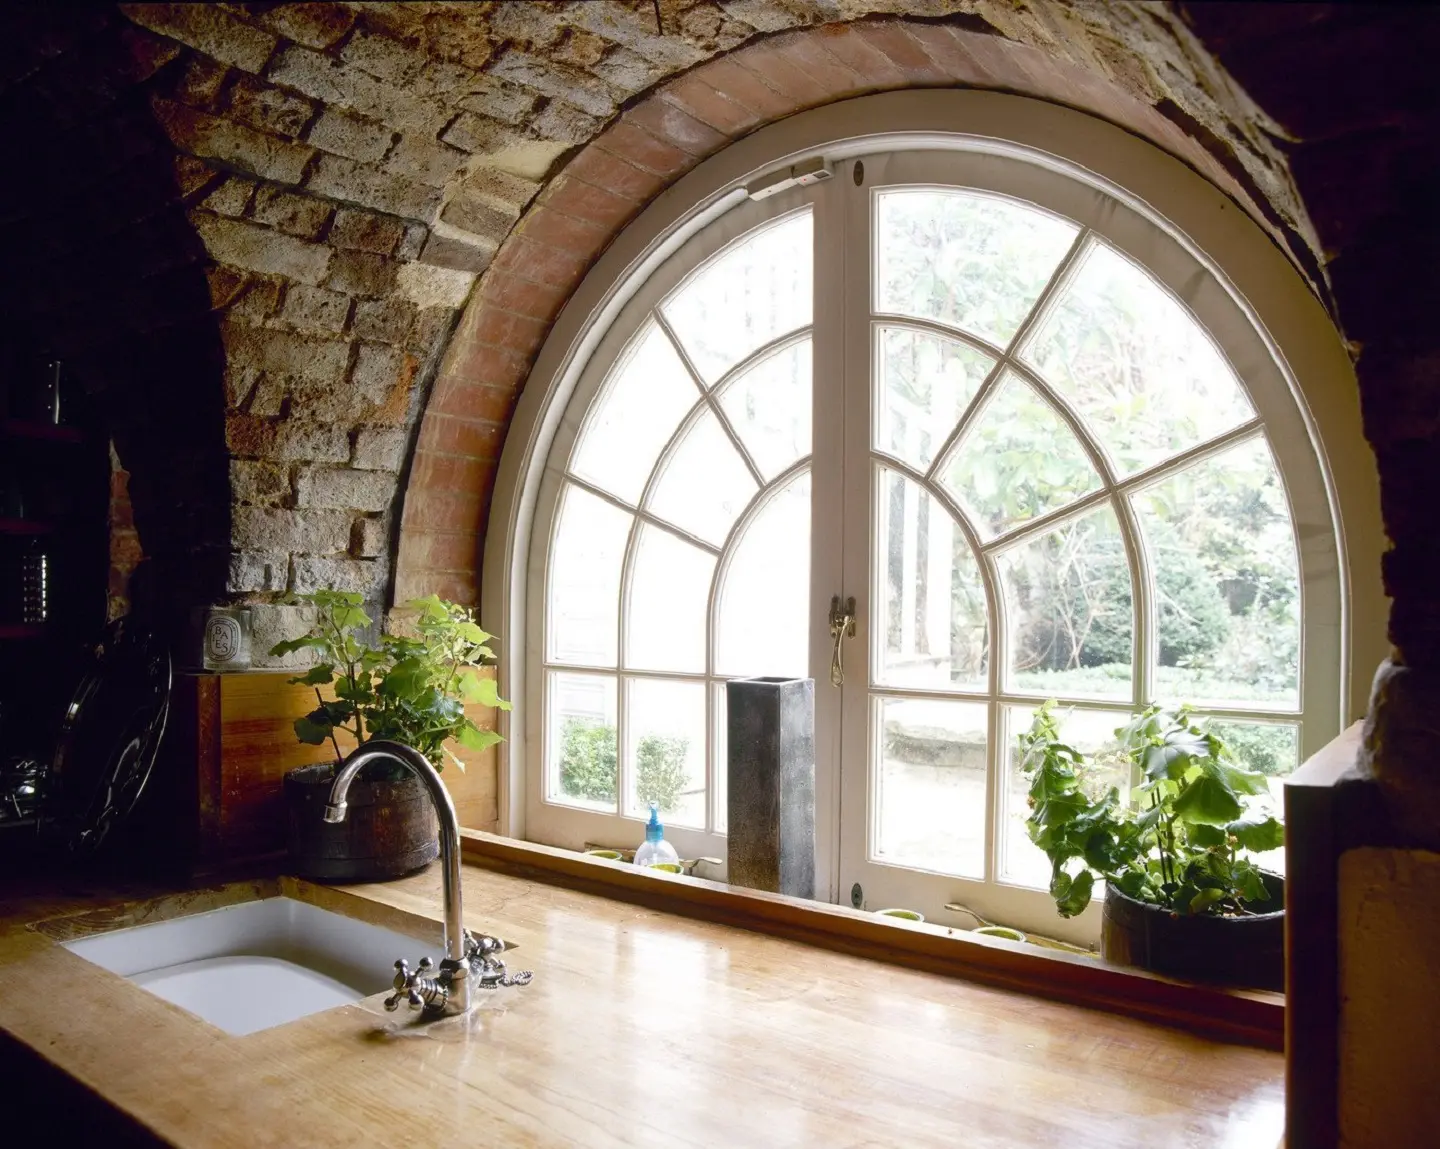 8. Arched Window Frames